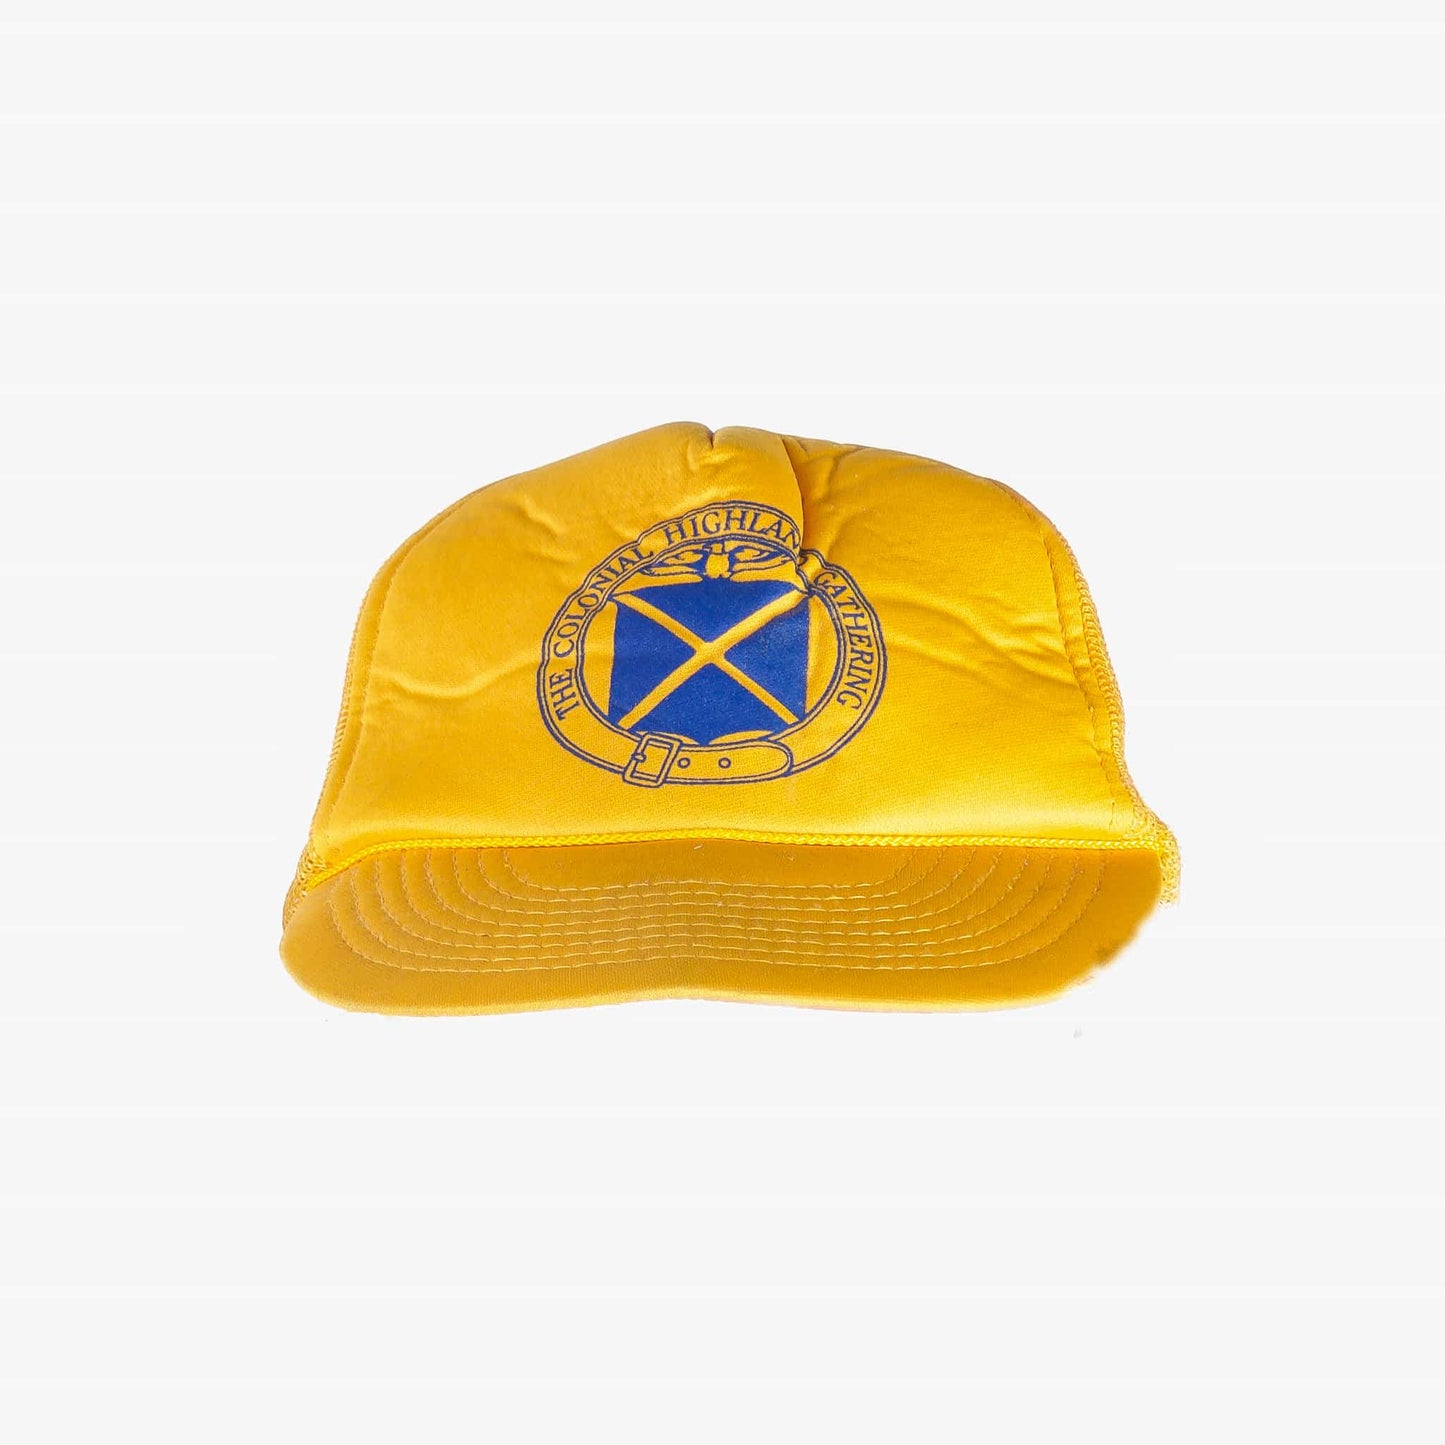 Vintage 'The Colonial Highland Gathering' Trucker Cap - American Madness